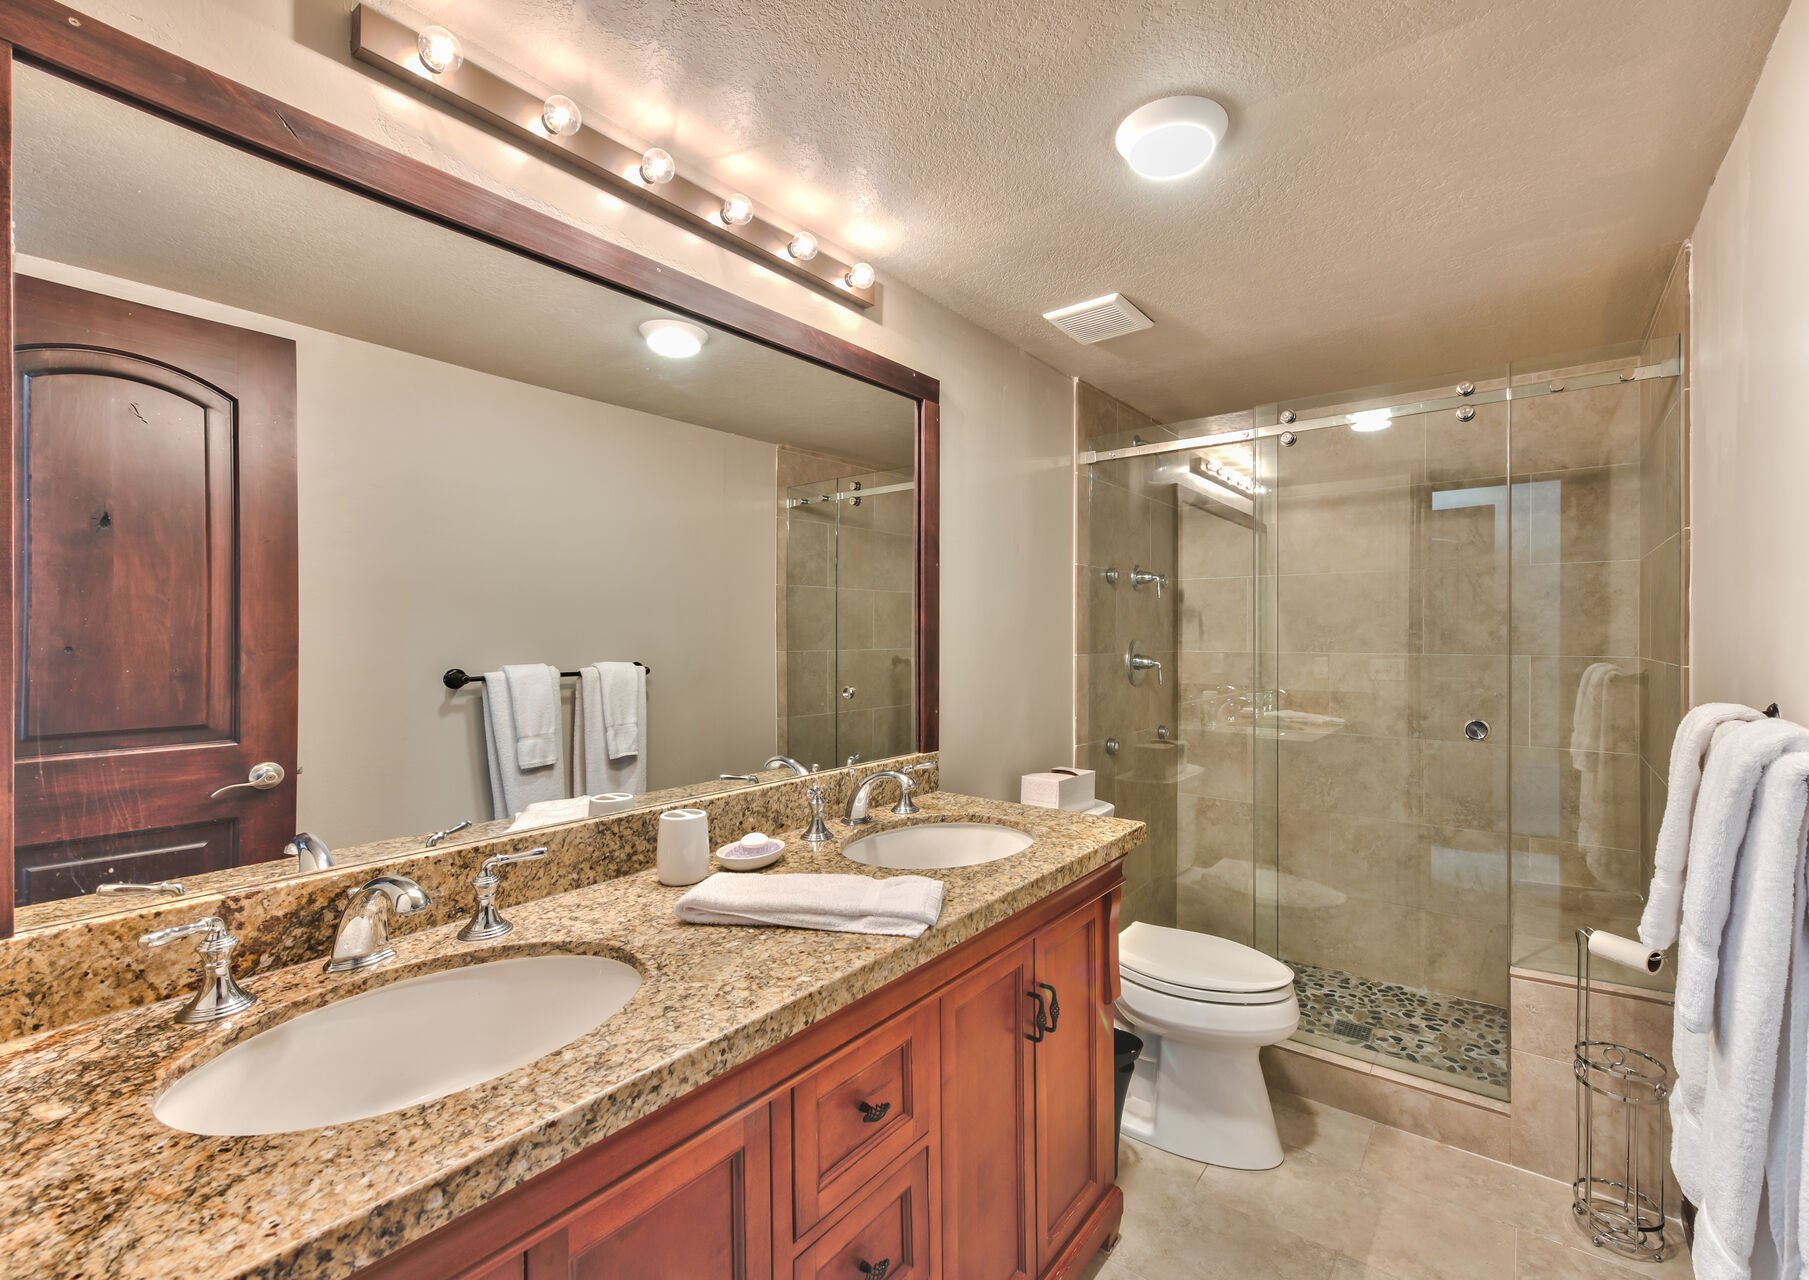 Master Bath with Dual Granite Counter Sinks and Lovely Tile Shower